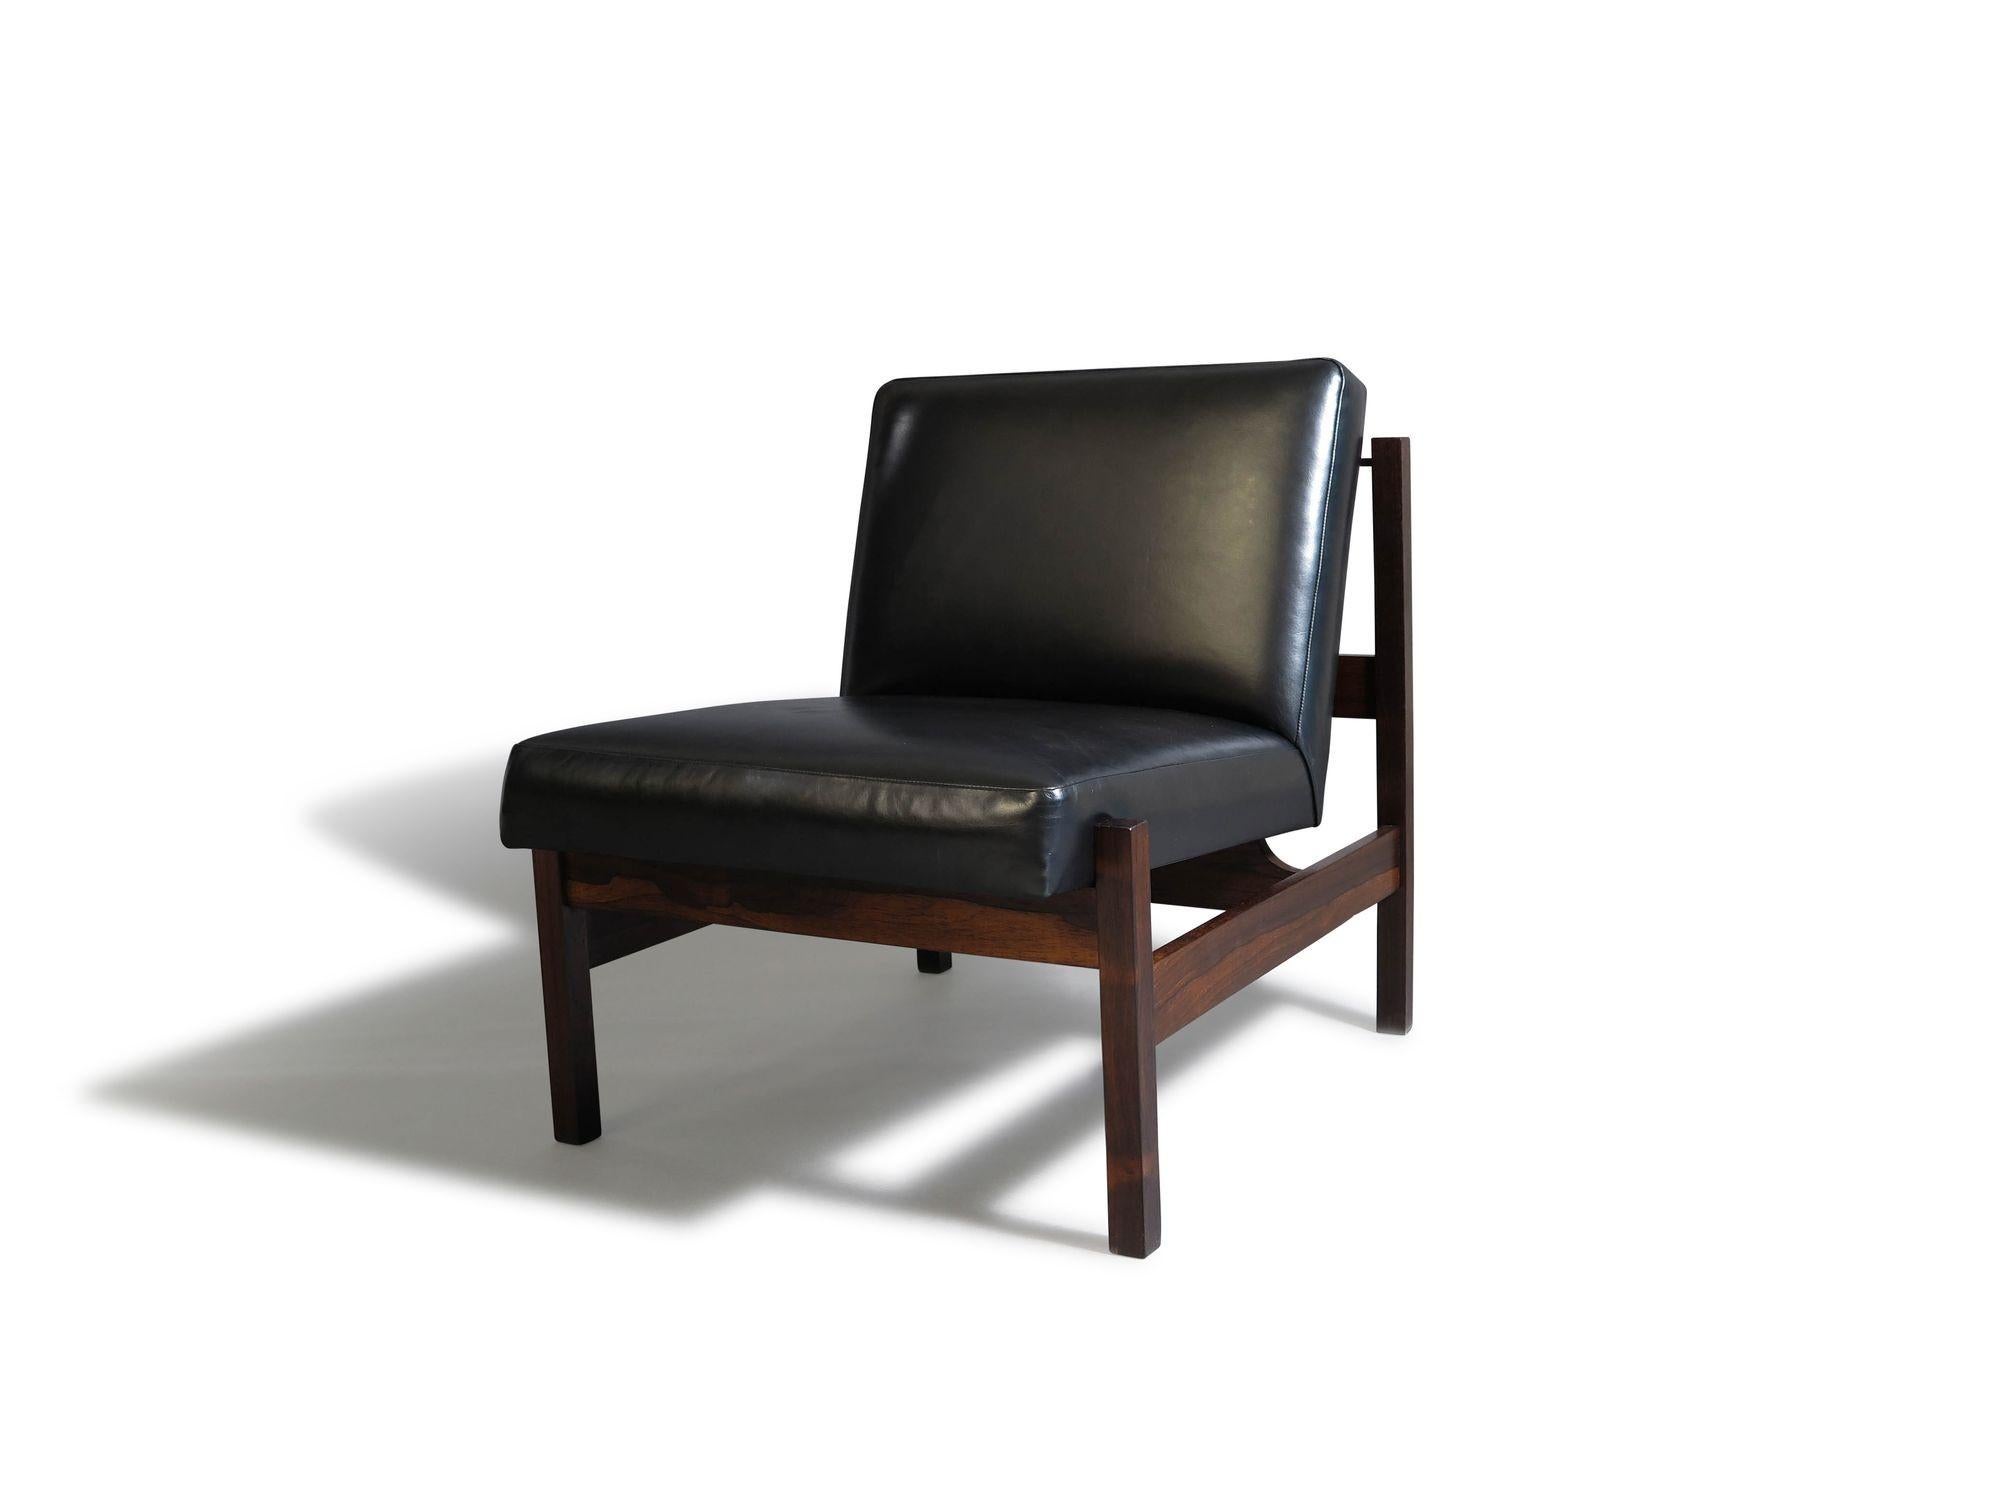 Elegant pair of minimal lounge chairs by Forma Brazil, crafted of Brazilian rosewood in new full aniline black leather.

Measurements
W 24.50'' x D 30'' x H 28.25''
Seat Height 16.25''